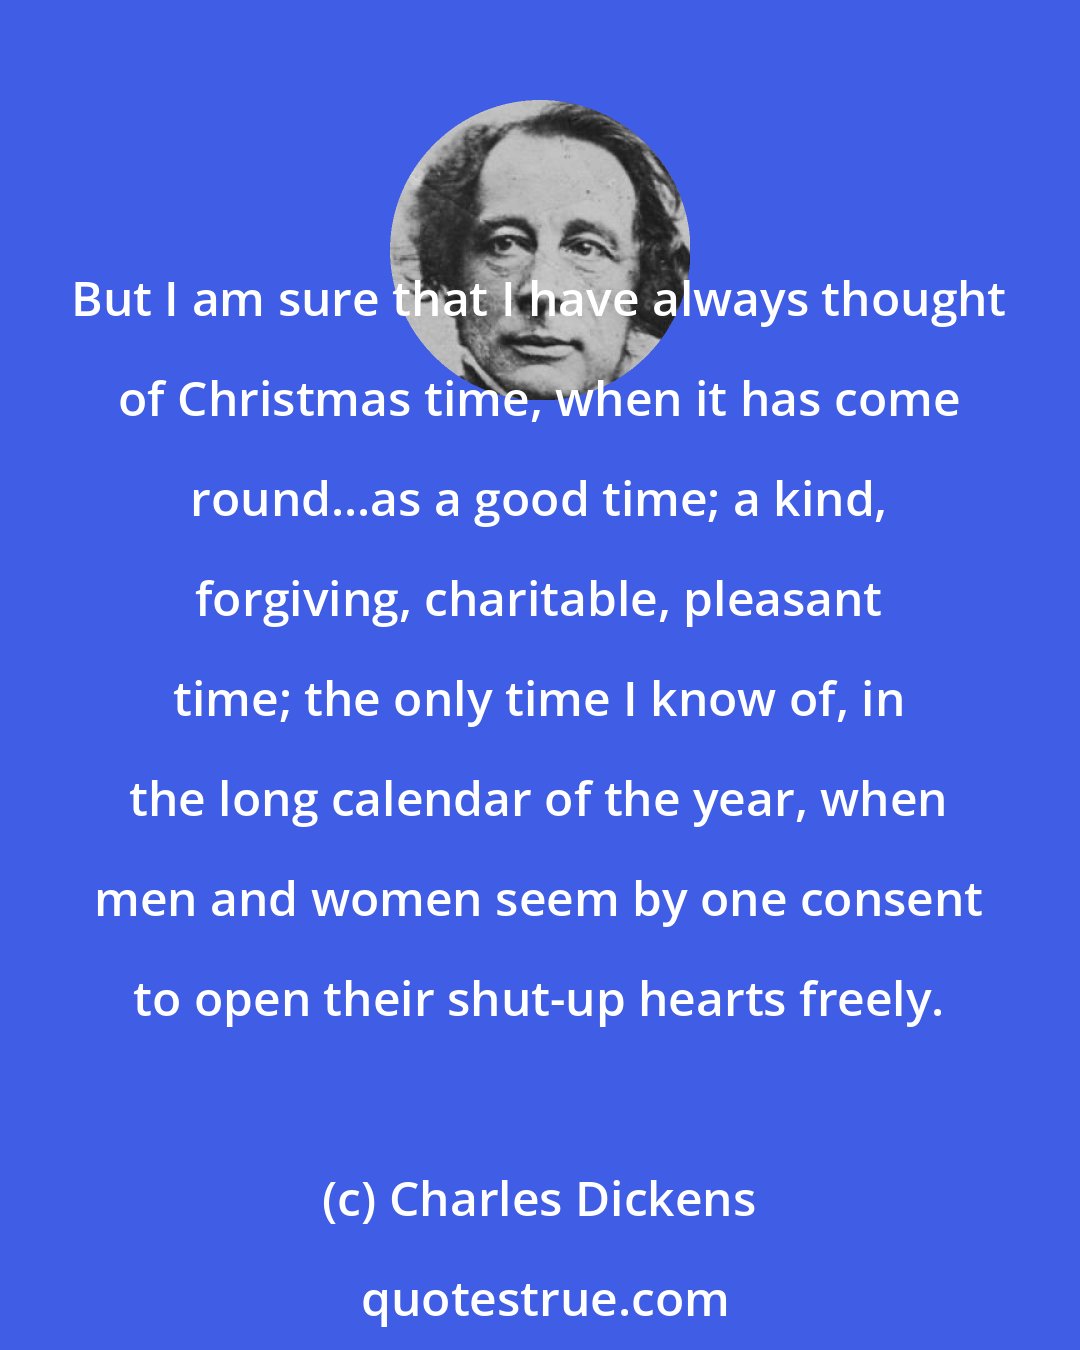 Charles Dickens: But I am sure that I have always thought of Christmas time, when it has come round...as a good time; a kind, forgiving, charitable, pleasant time; the only time I know of, in the long calendar of the year, when men and women seem by one consent to open their shut-up hearts freely.